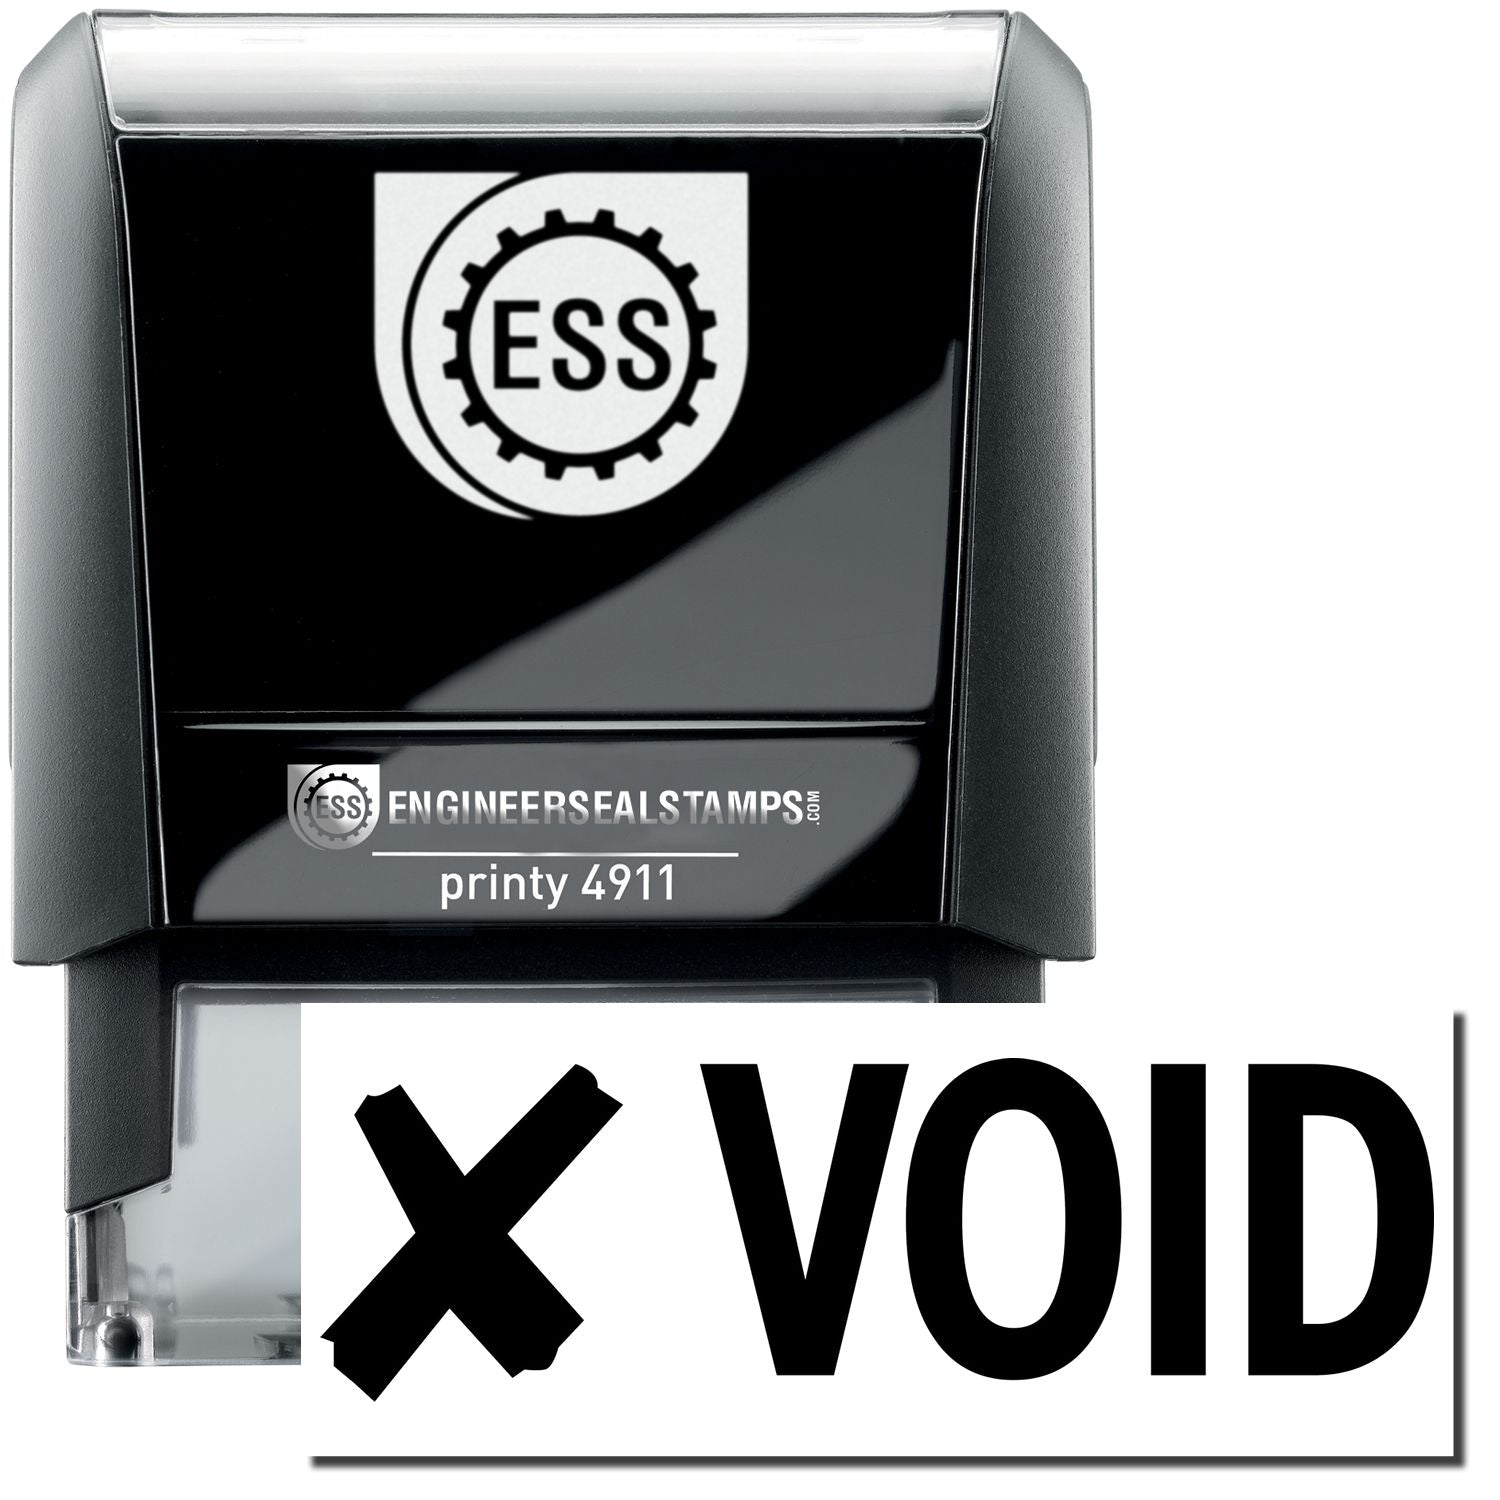 A self-inking stamp with a stamped image showing how the text "VOID" with an image of a cross (X) on the left is displayed after stamping.